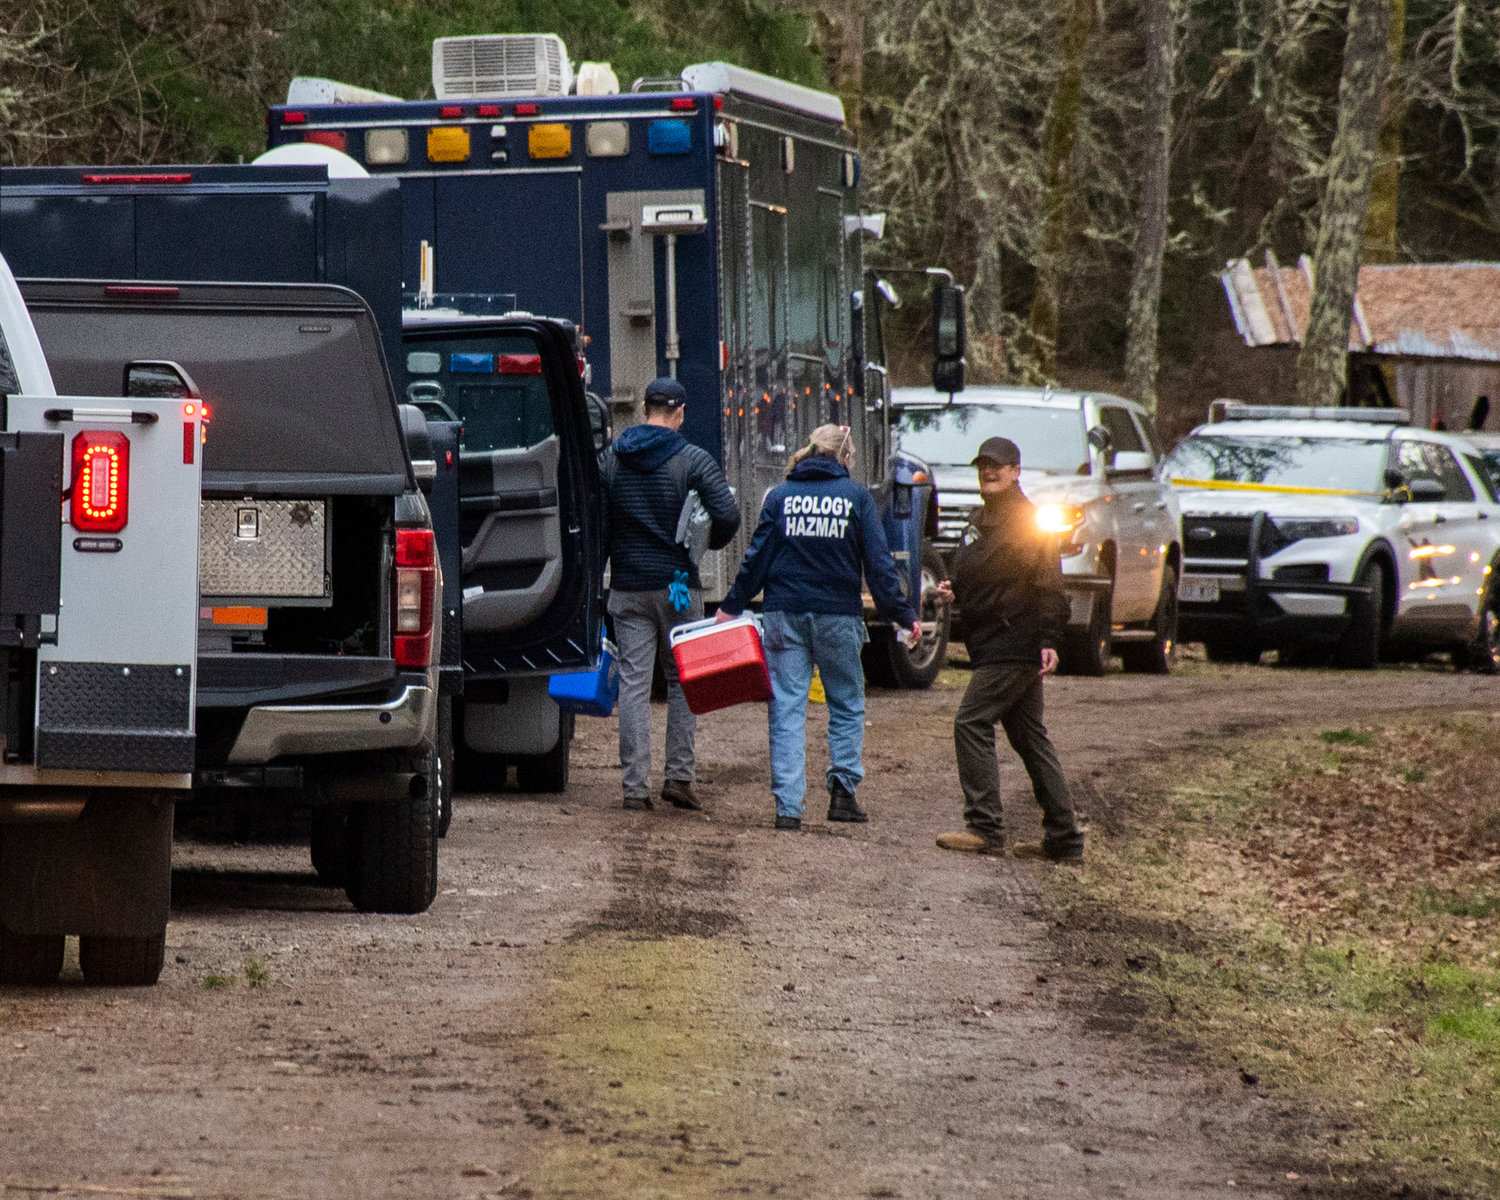 Ecology Hazmat crews work to remove non-active materials from the 20000 block of Neat Road Southeast Tuesday afternoon in Yelm.